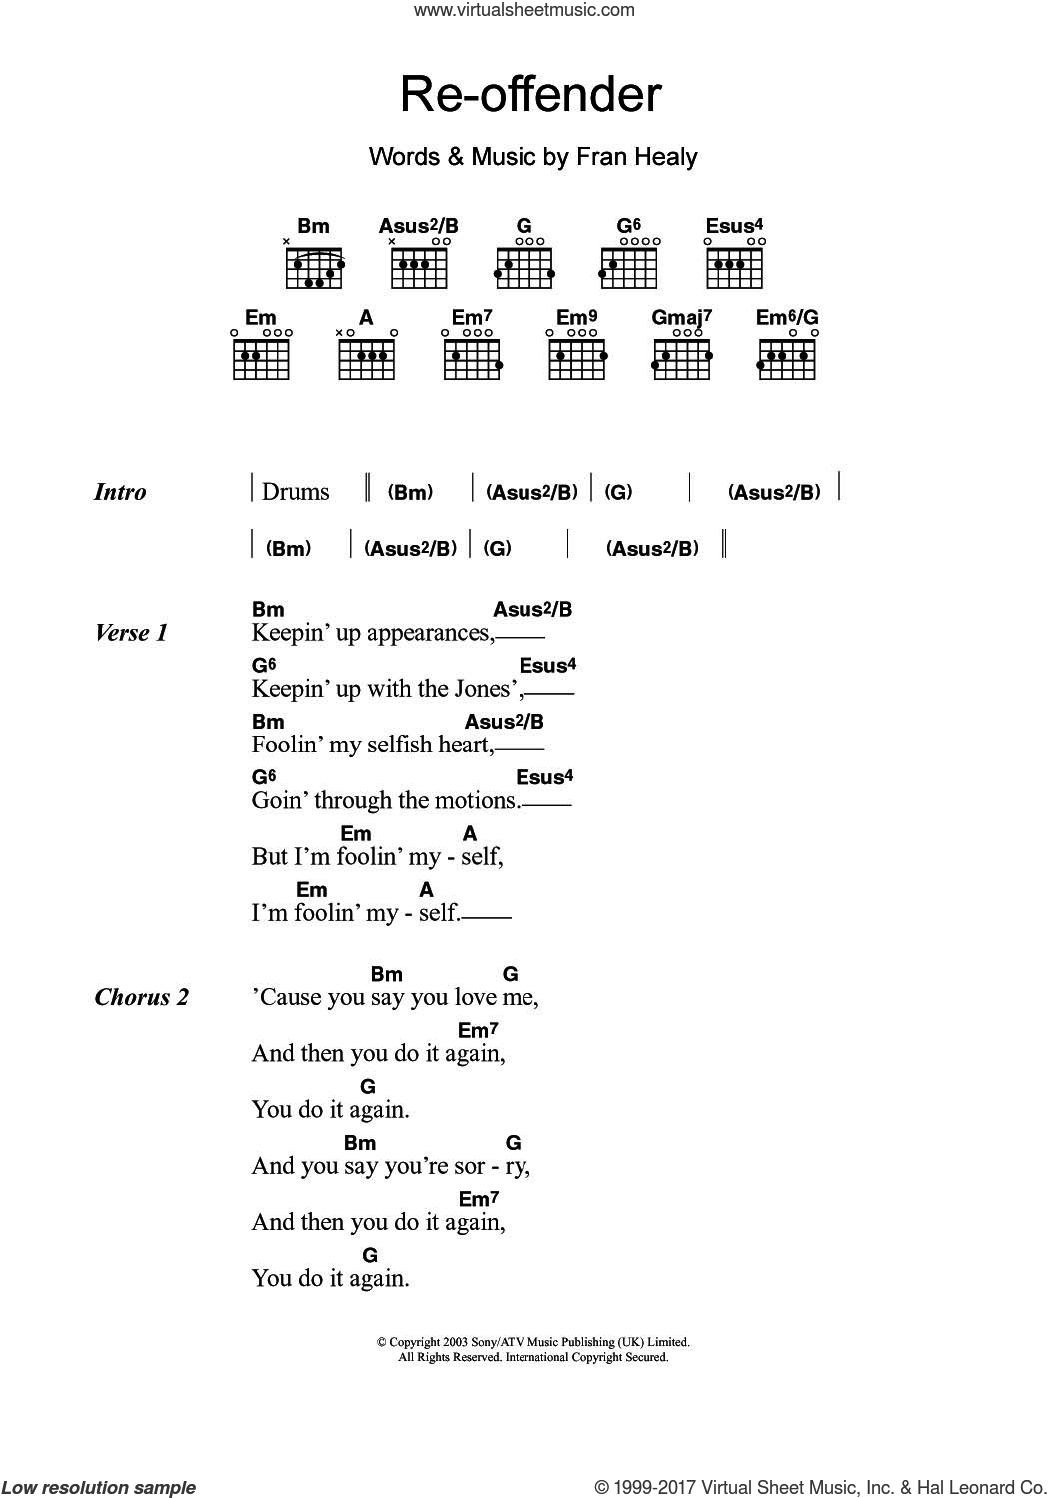 Re-offender sheet music for guitar (chords) (PDF)